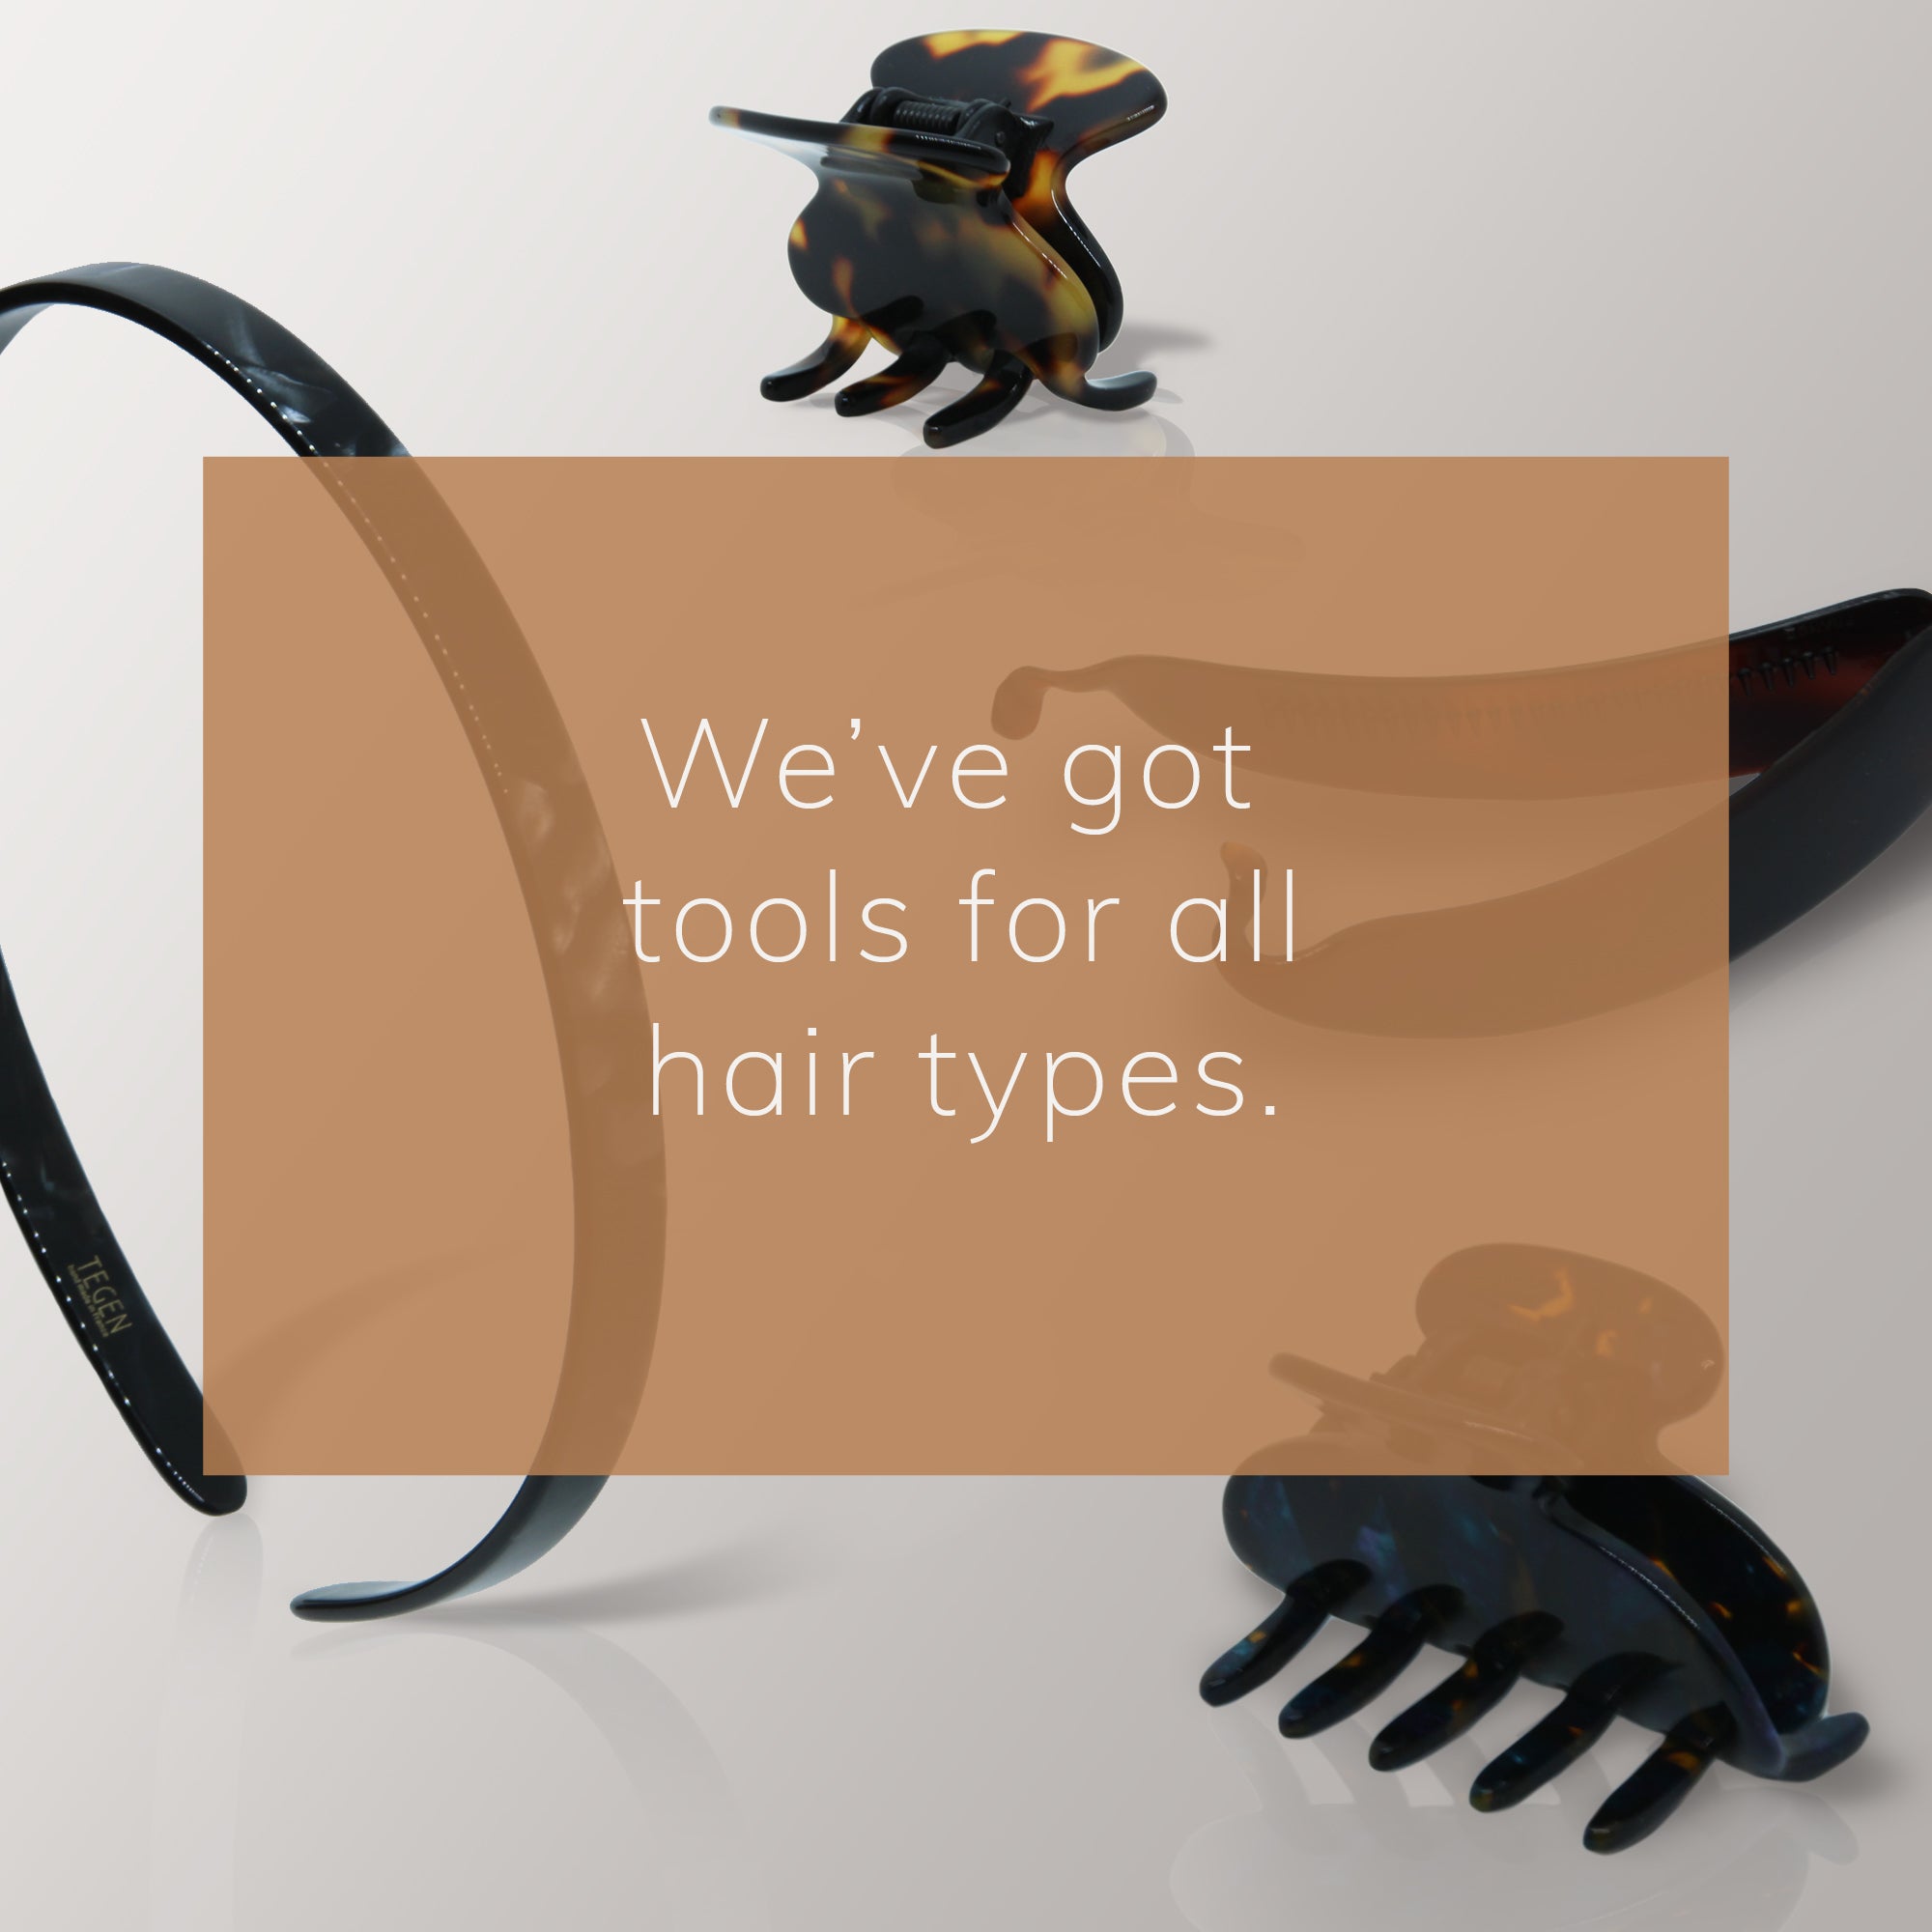 We've got tools for all hair types. Mens Hair tools blog